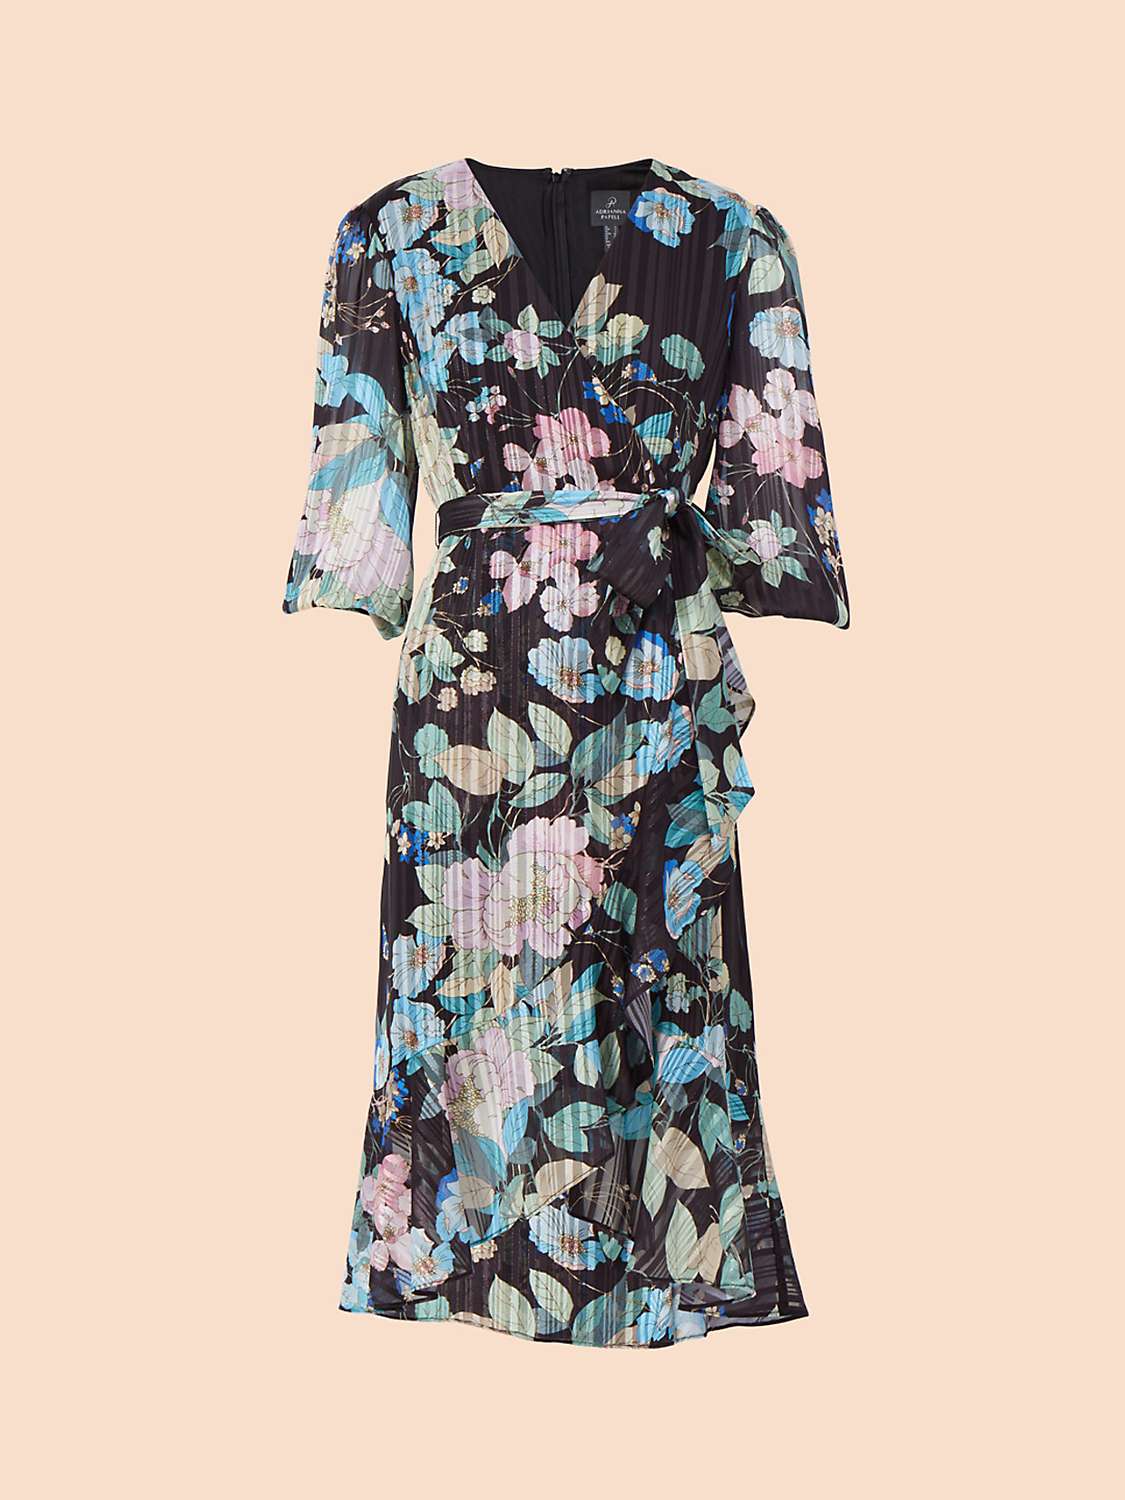 Buy Adrianna Papell Floral Chiffon Wrap Dress, Black/Multi Online at johnlewis.com